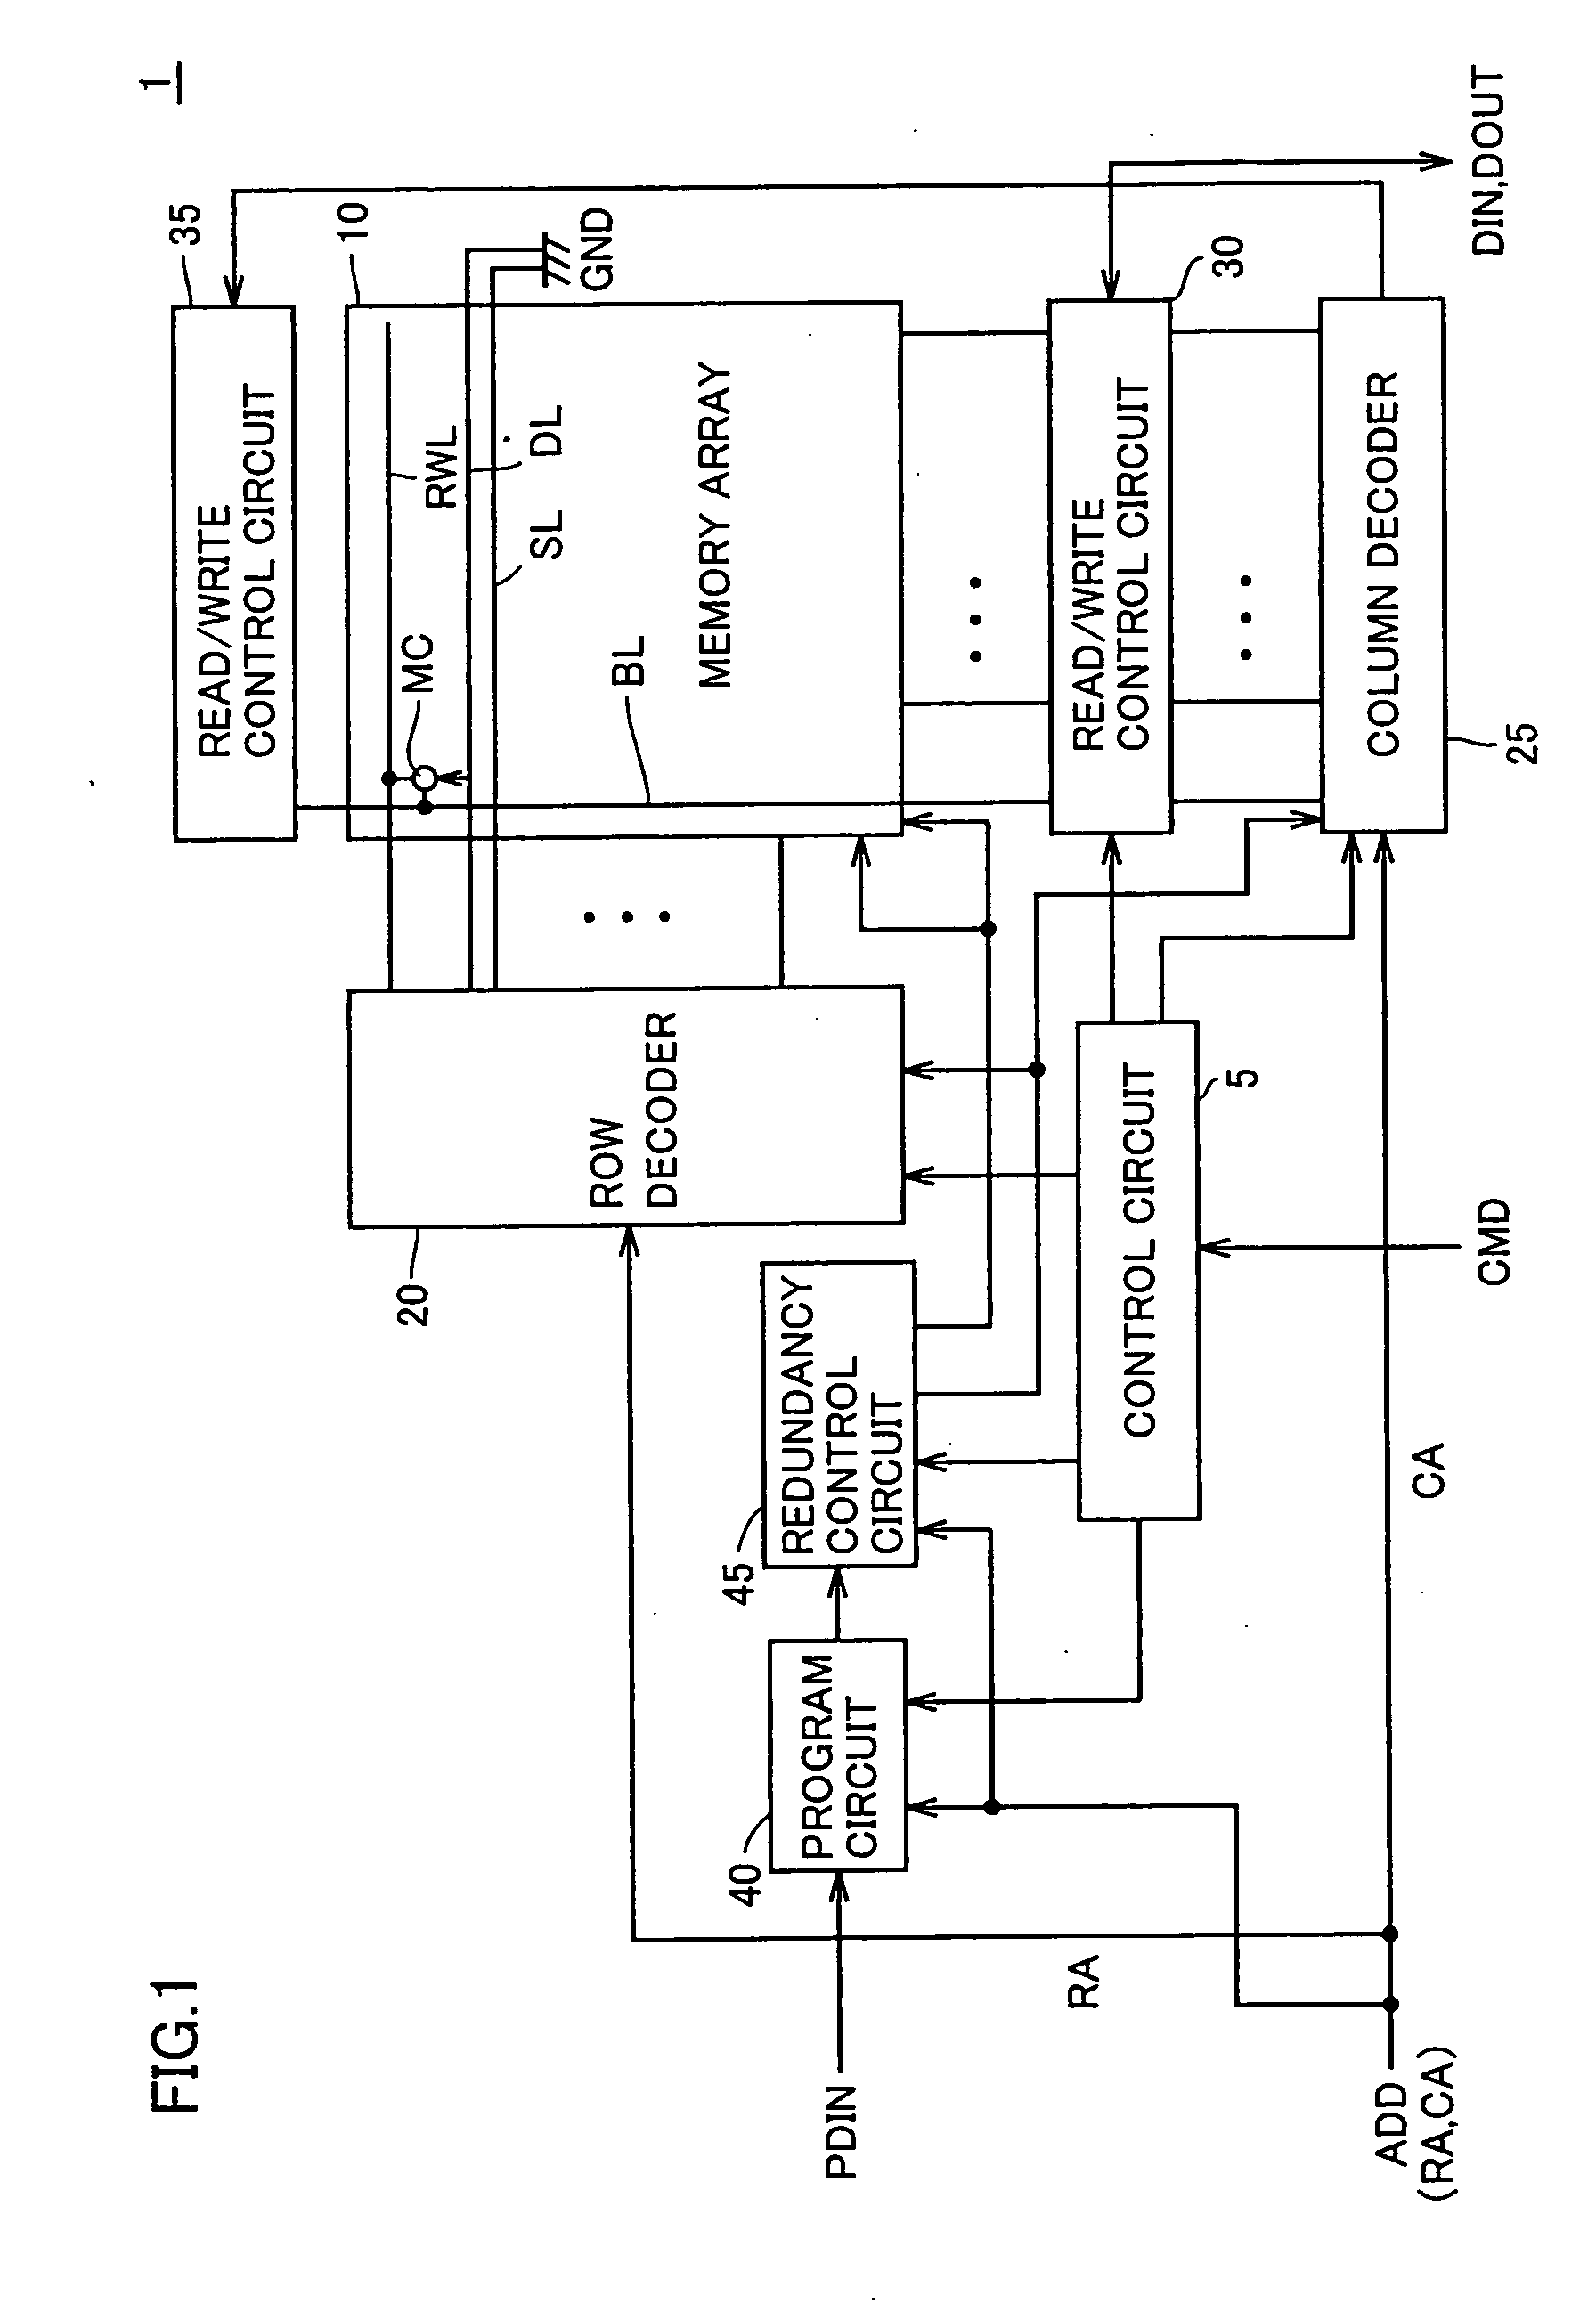 Thin film magnetic memory device storing program information efficiently and stably